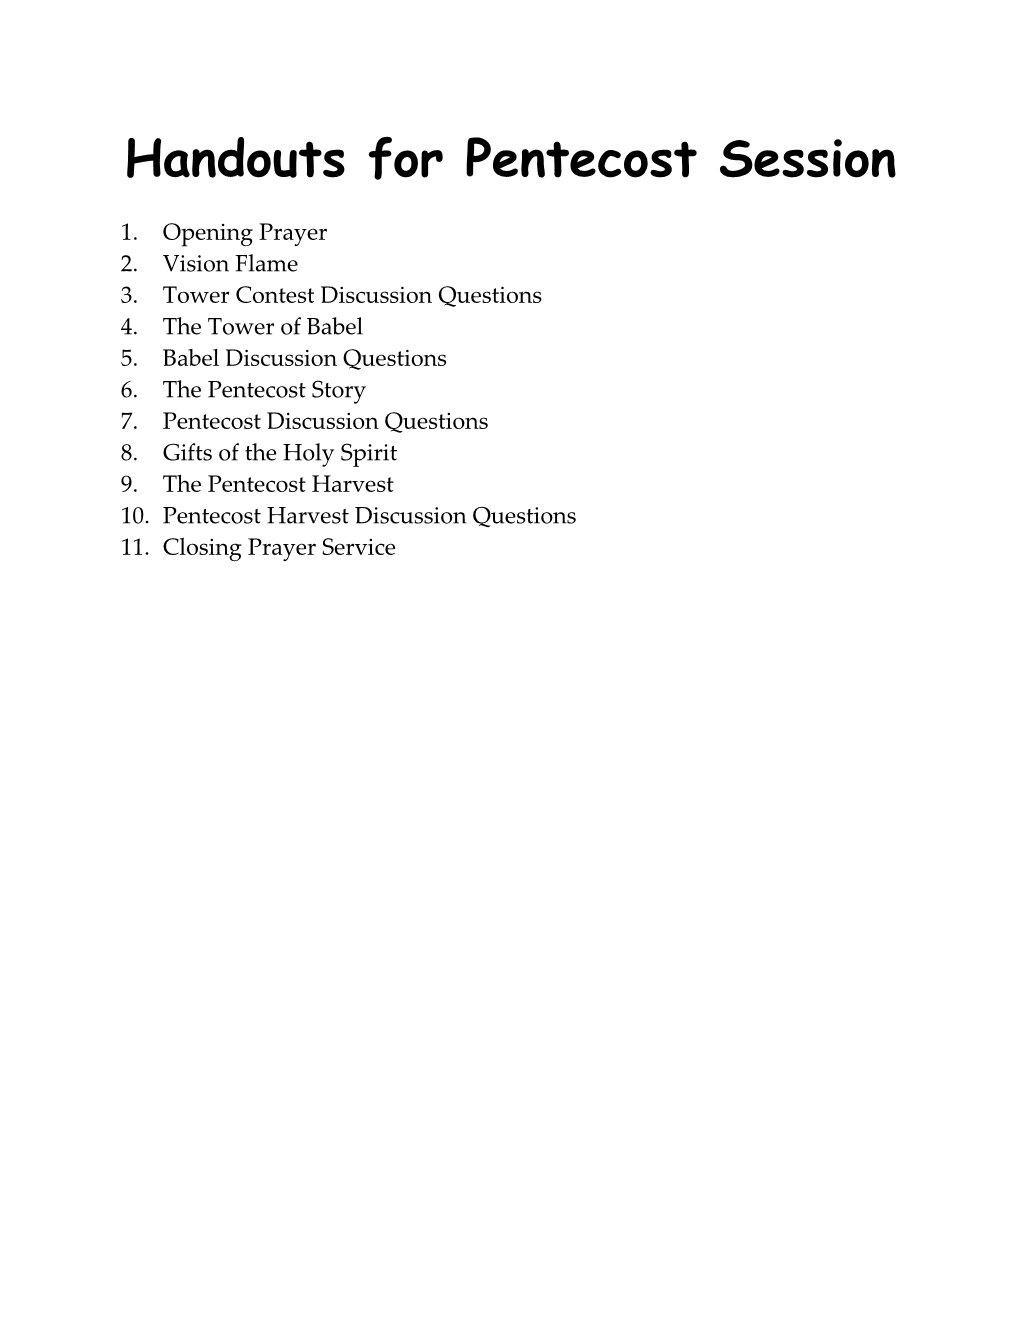 Handouts for Pentecost Session